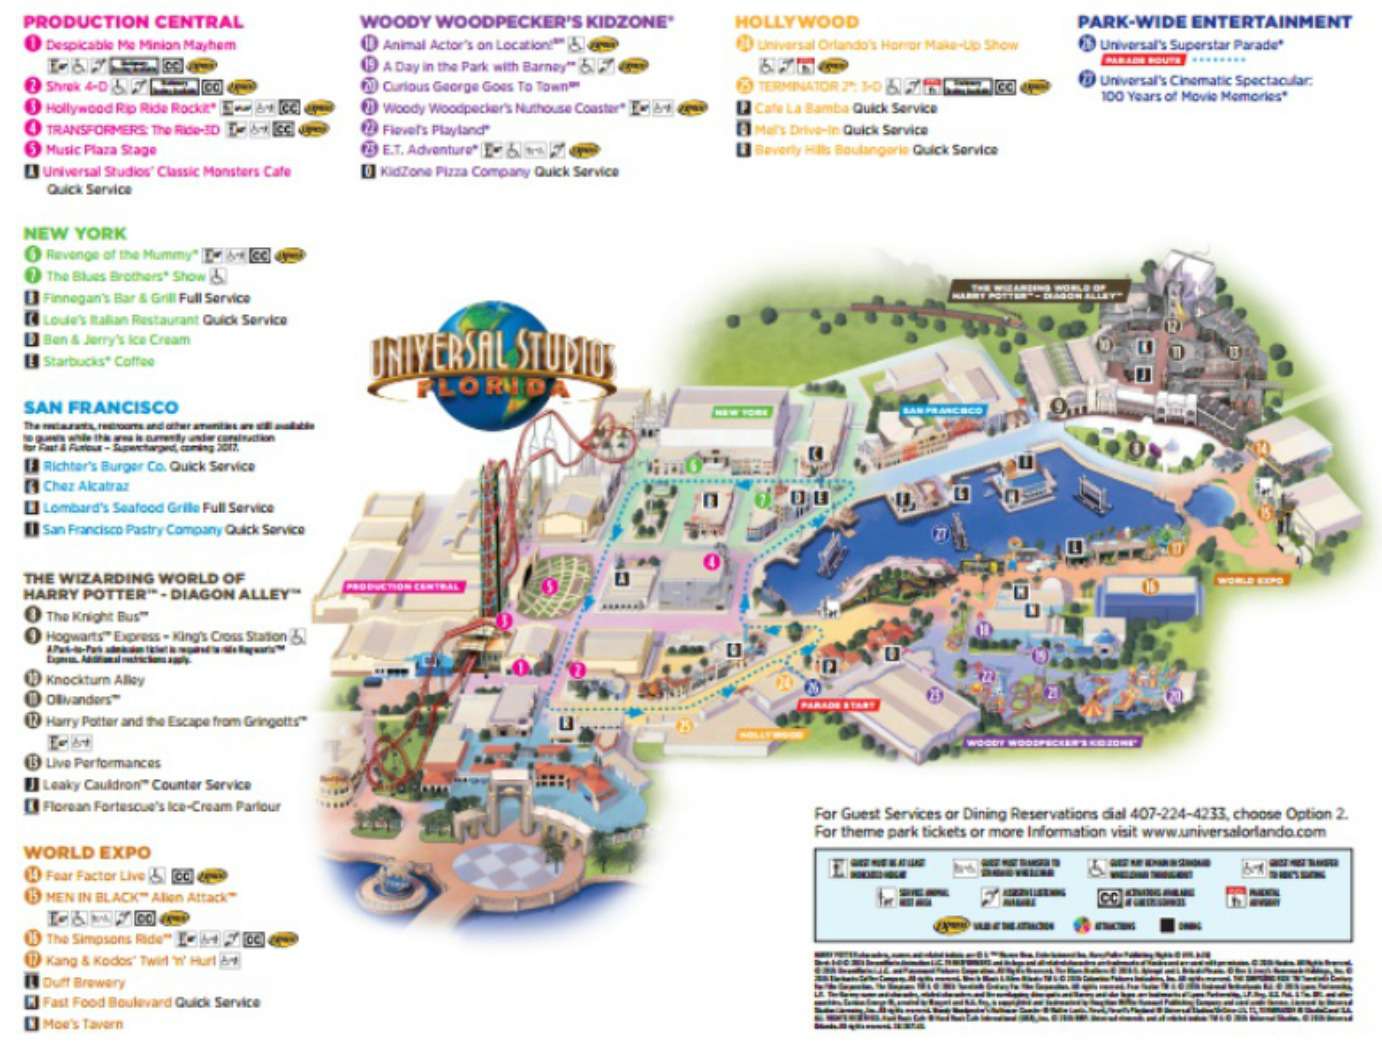 Maps of Universal Orlando Resort's Parks and Hotels